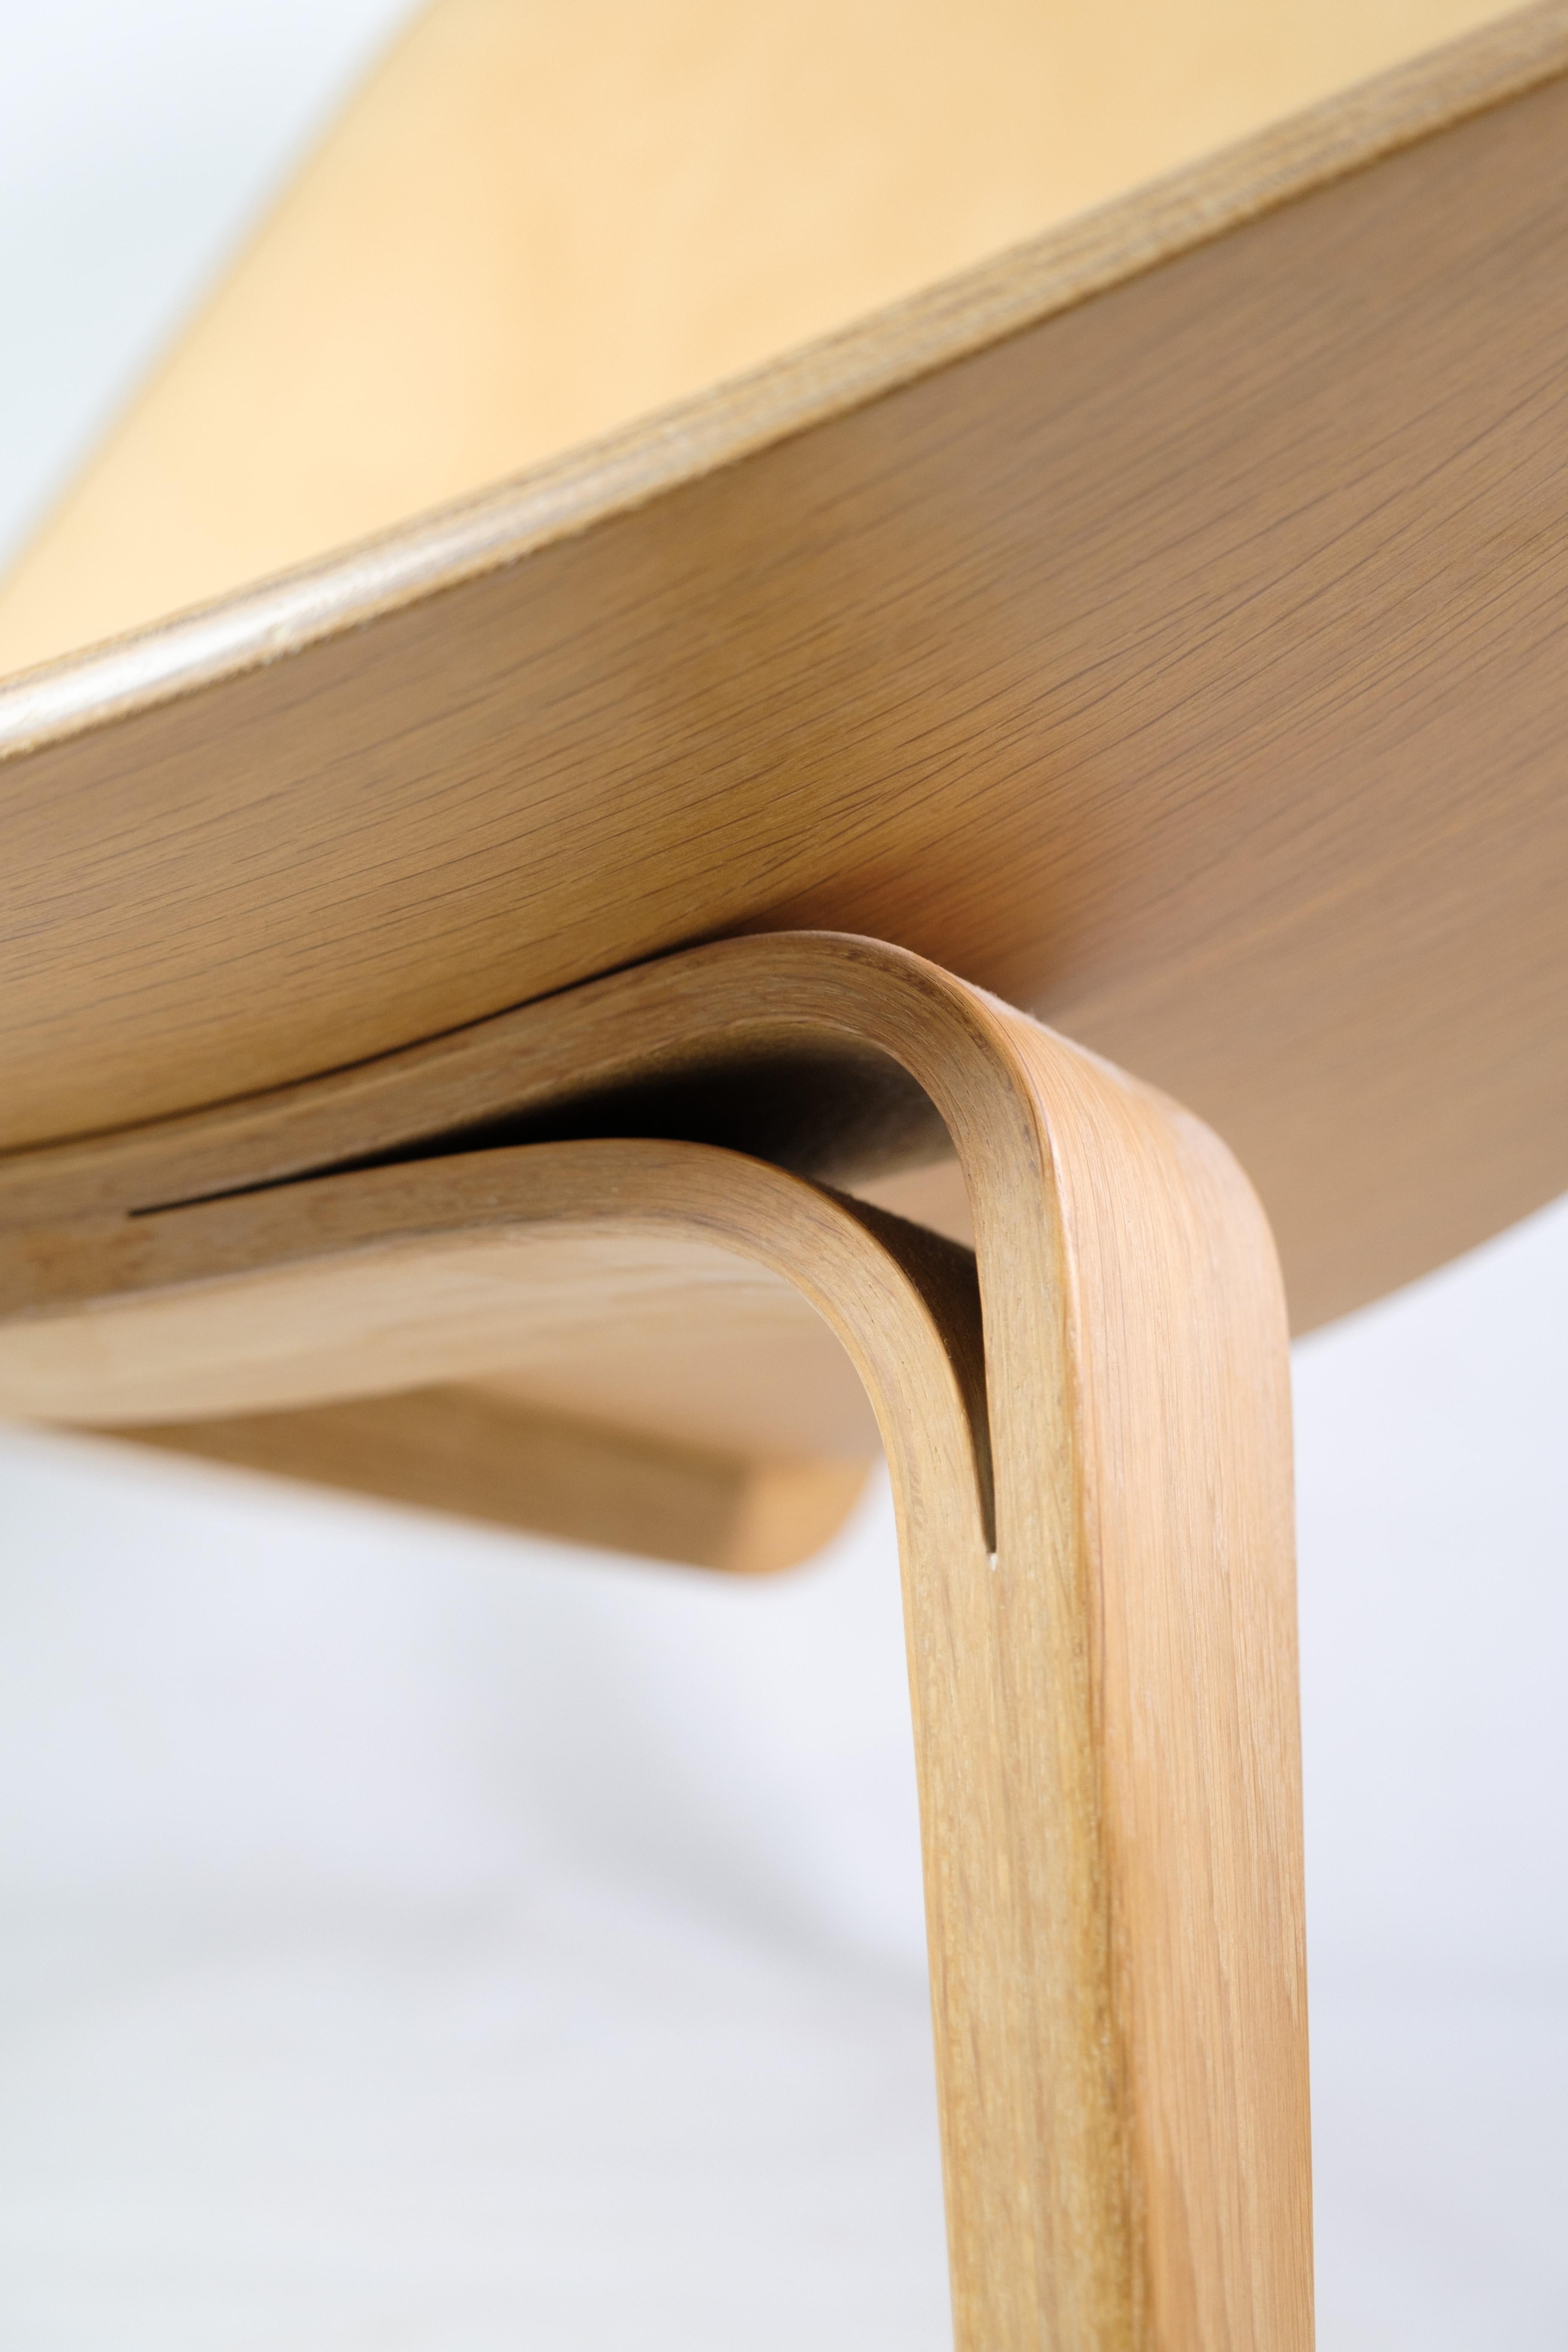 Contemporary he shell chair model CH07, designed by Hans J. Wegner, made of oak from 2007